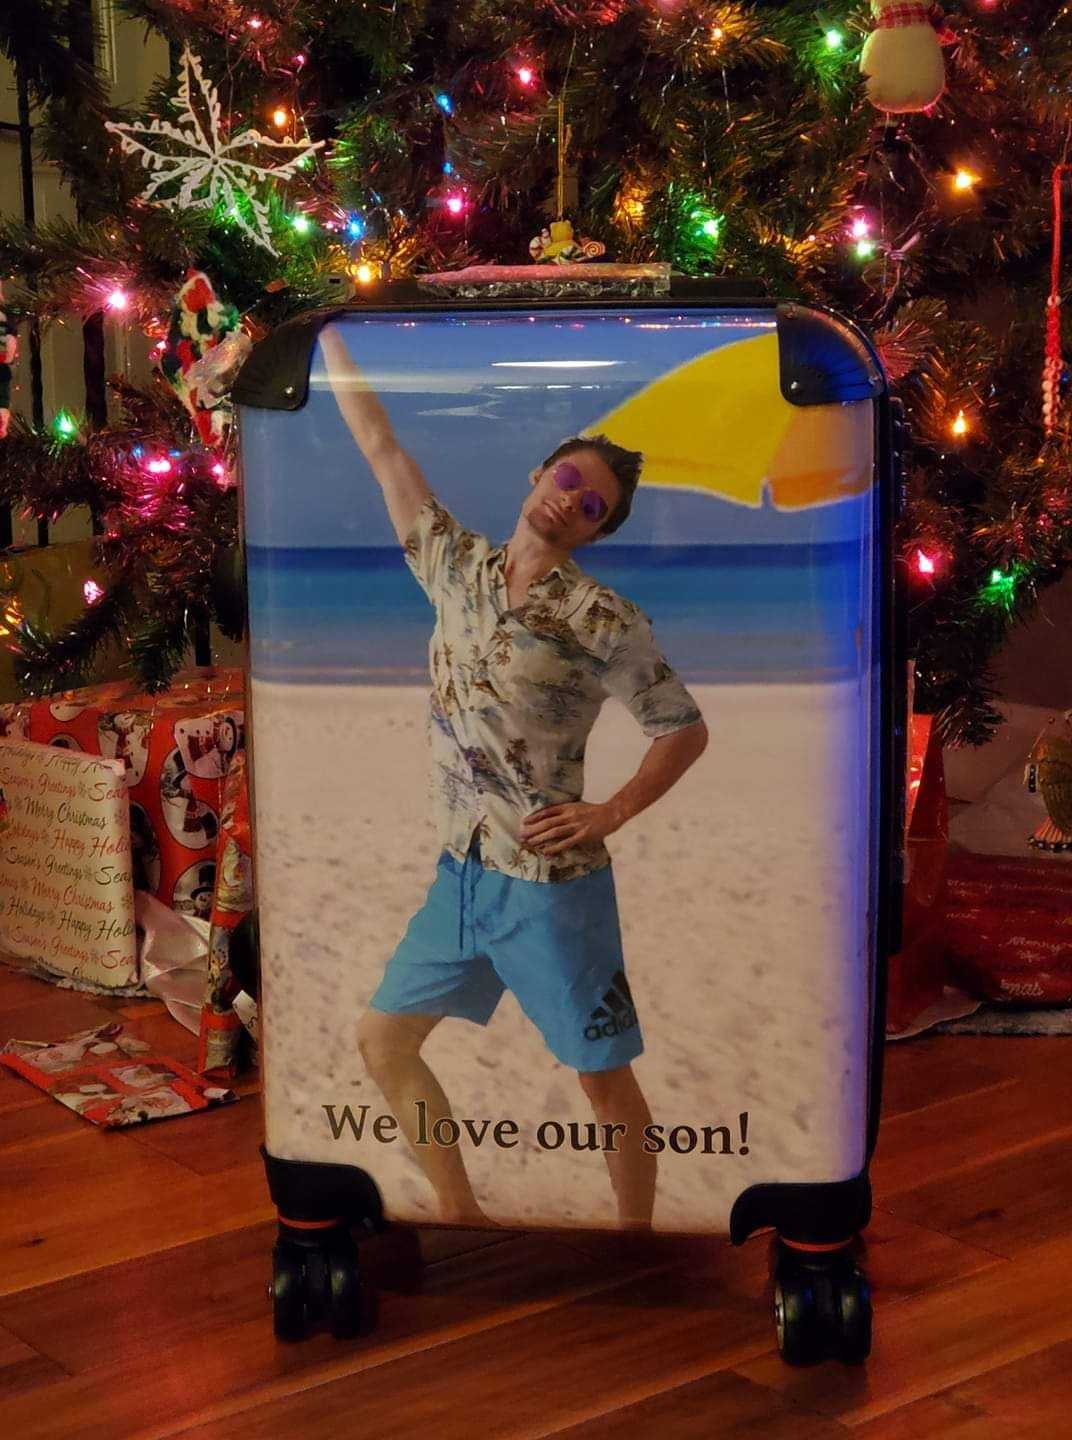 My parents are retiring and want to travel full time. My brother sent them this suitcase for Christmas.